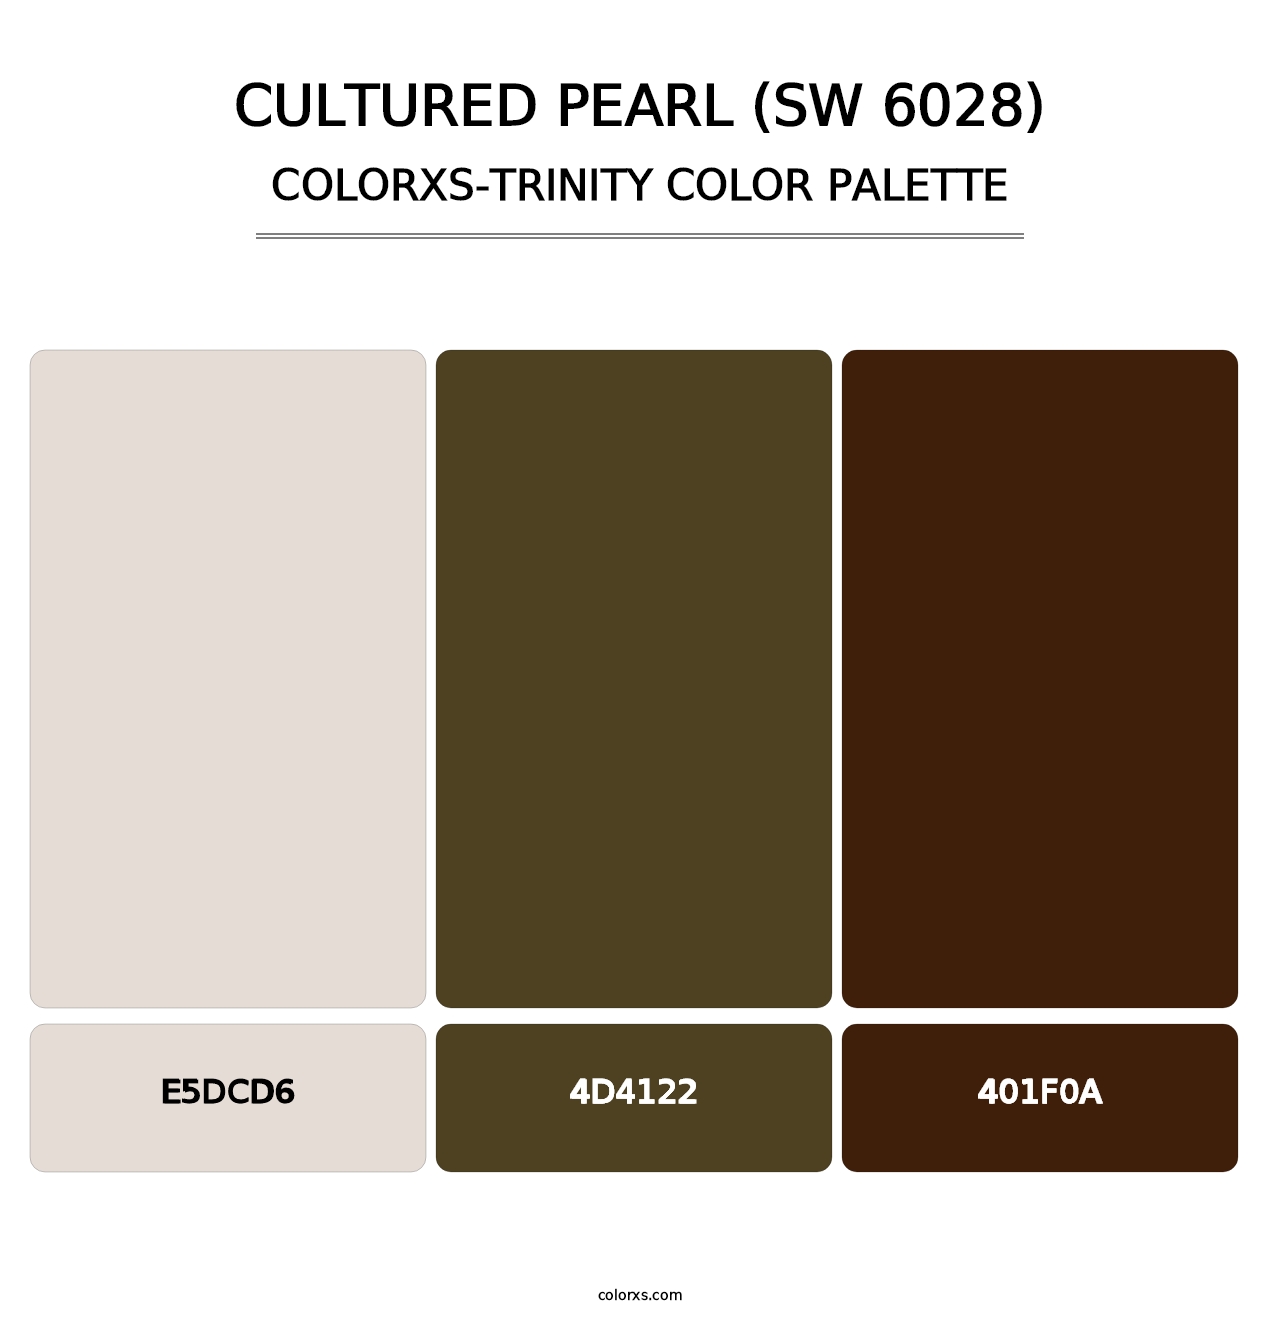 Cultured Pearl (SW 6028) - Colorxs Trinity Palette